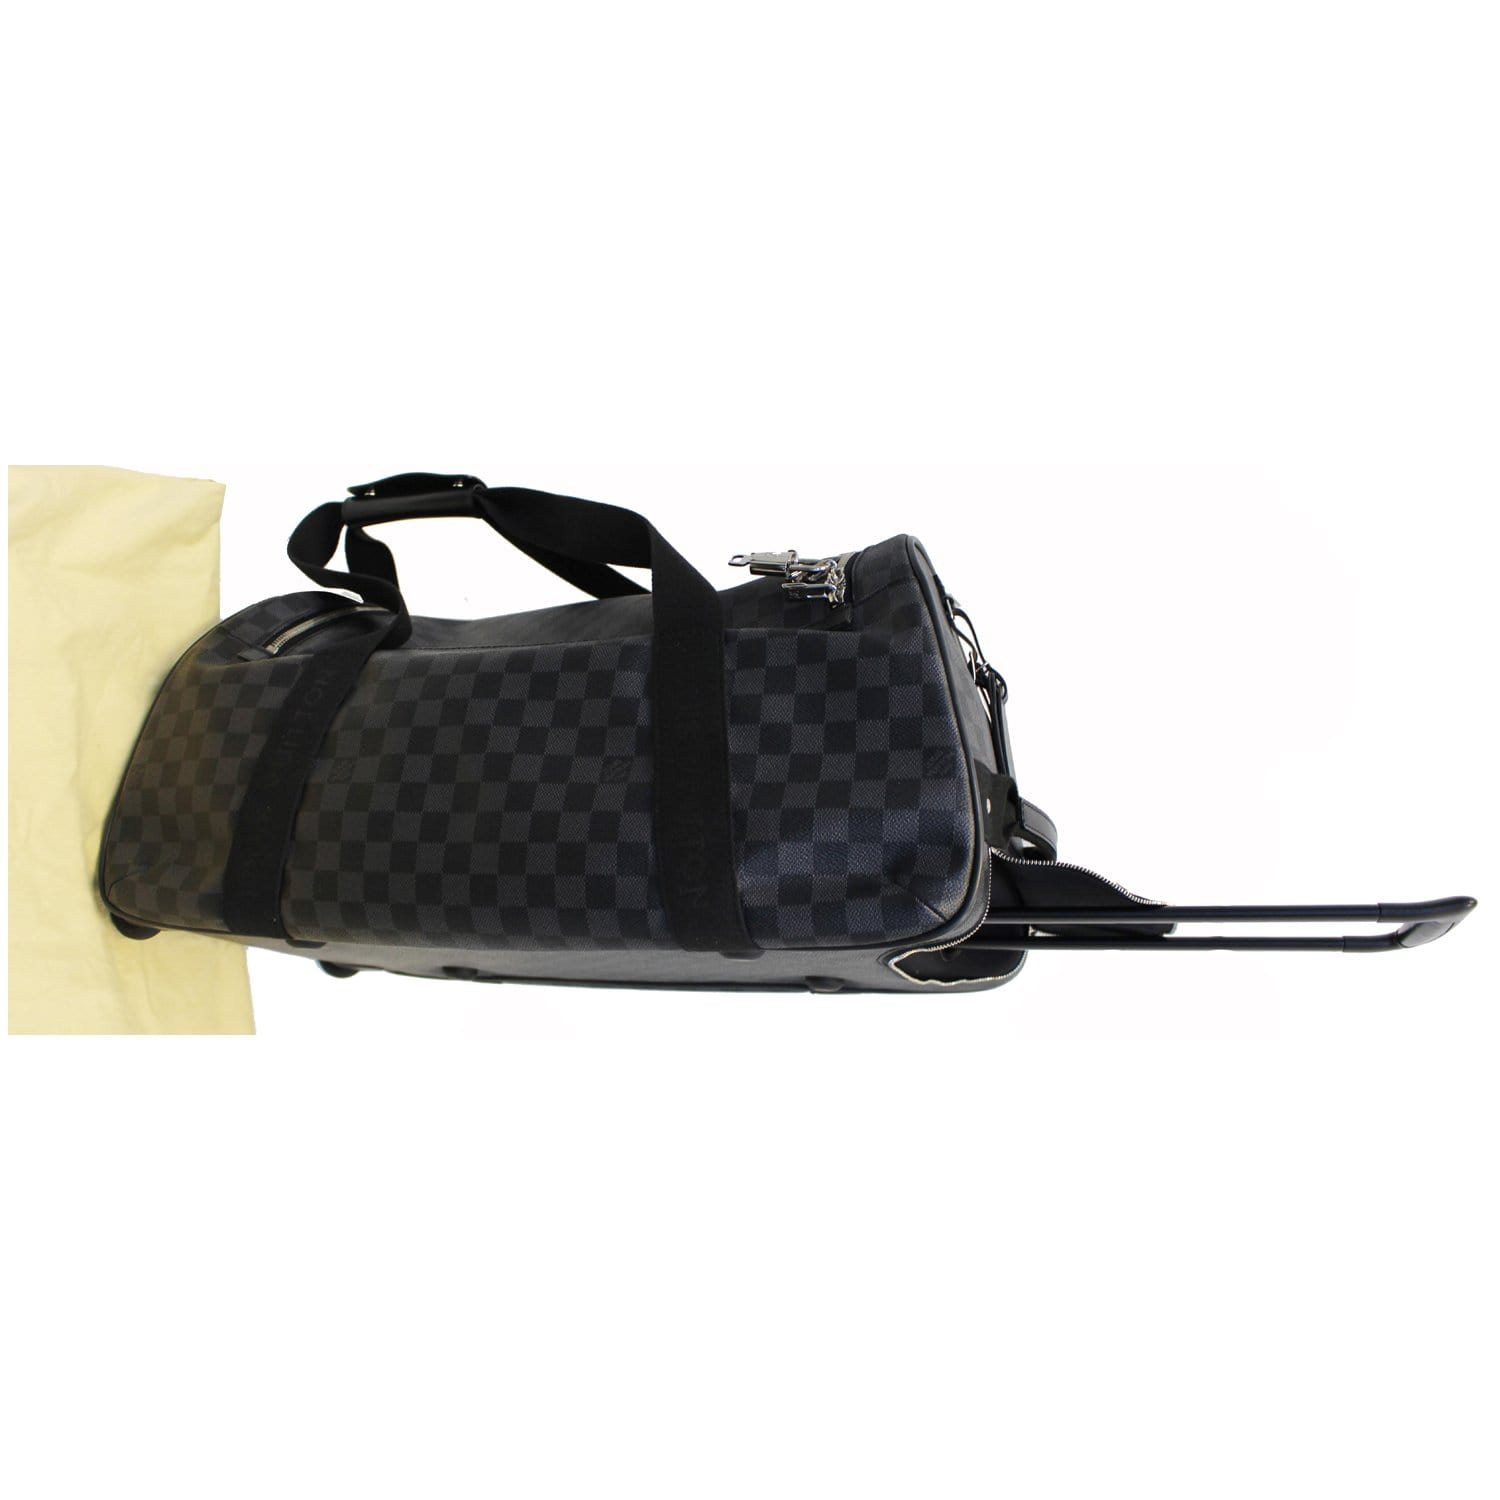 LOUIS VUITTON BLACK DAMIER GEANTEEOLE 50 ROLLING DUFFLE BAG for sale at  auction on 29th October